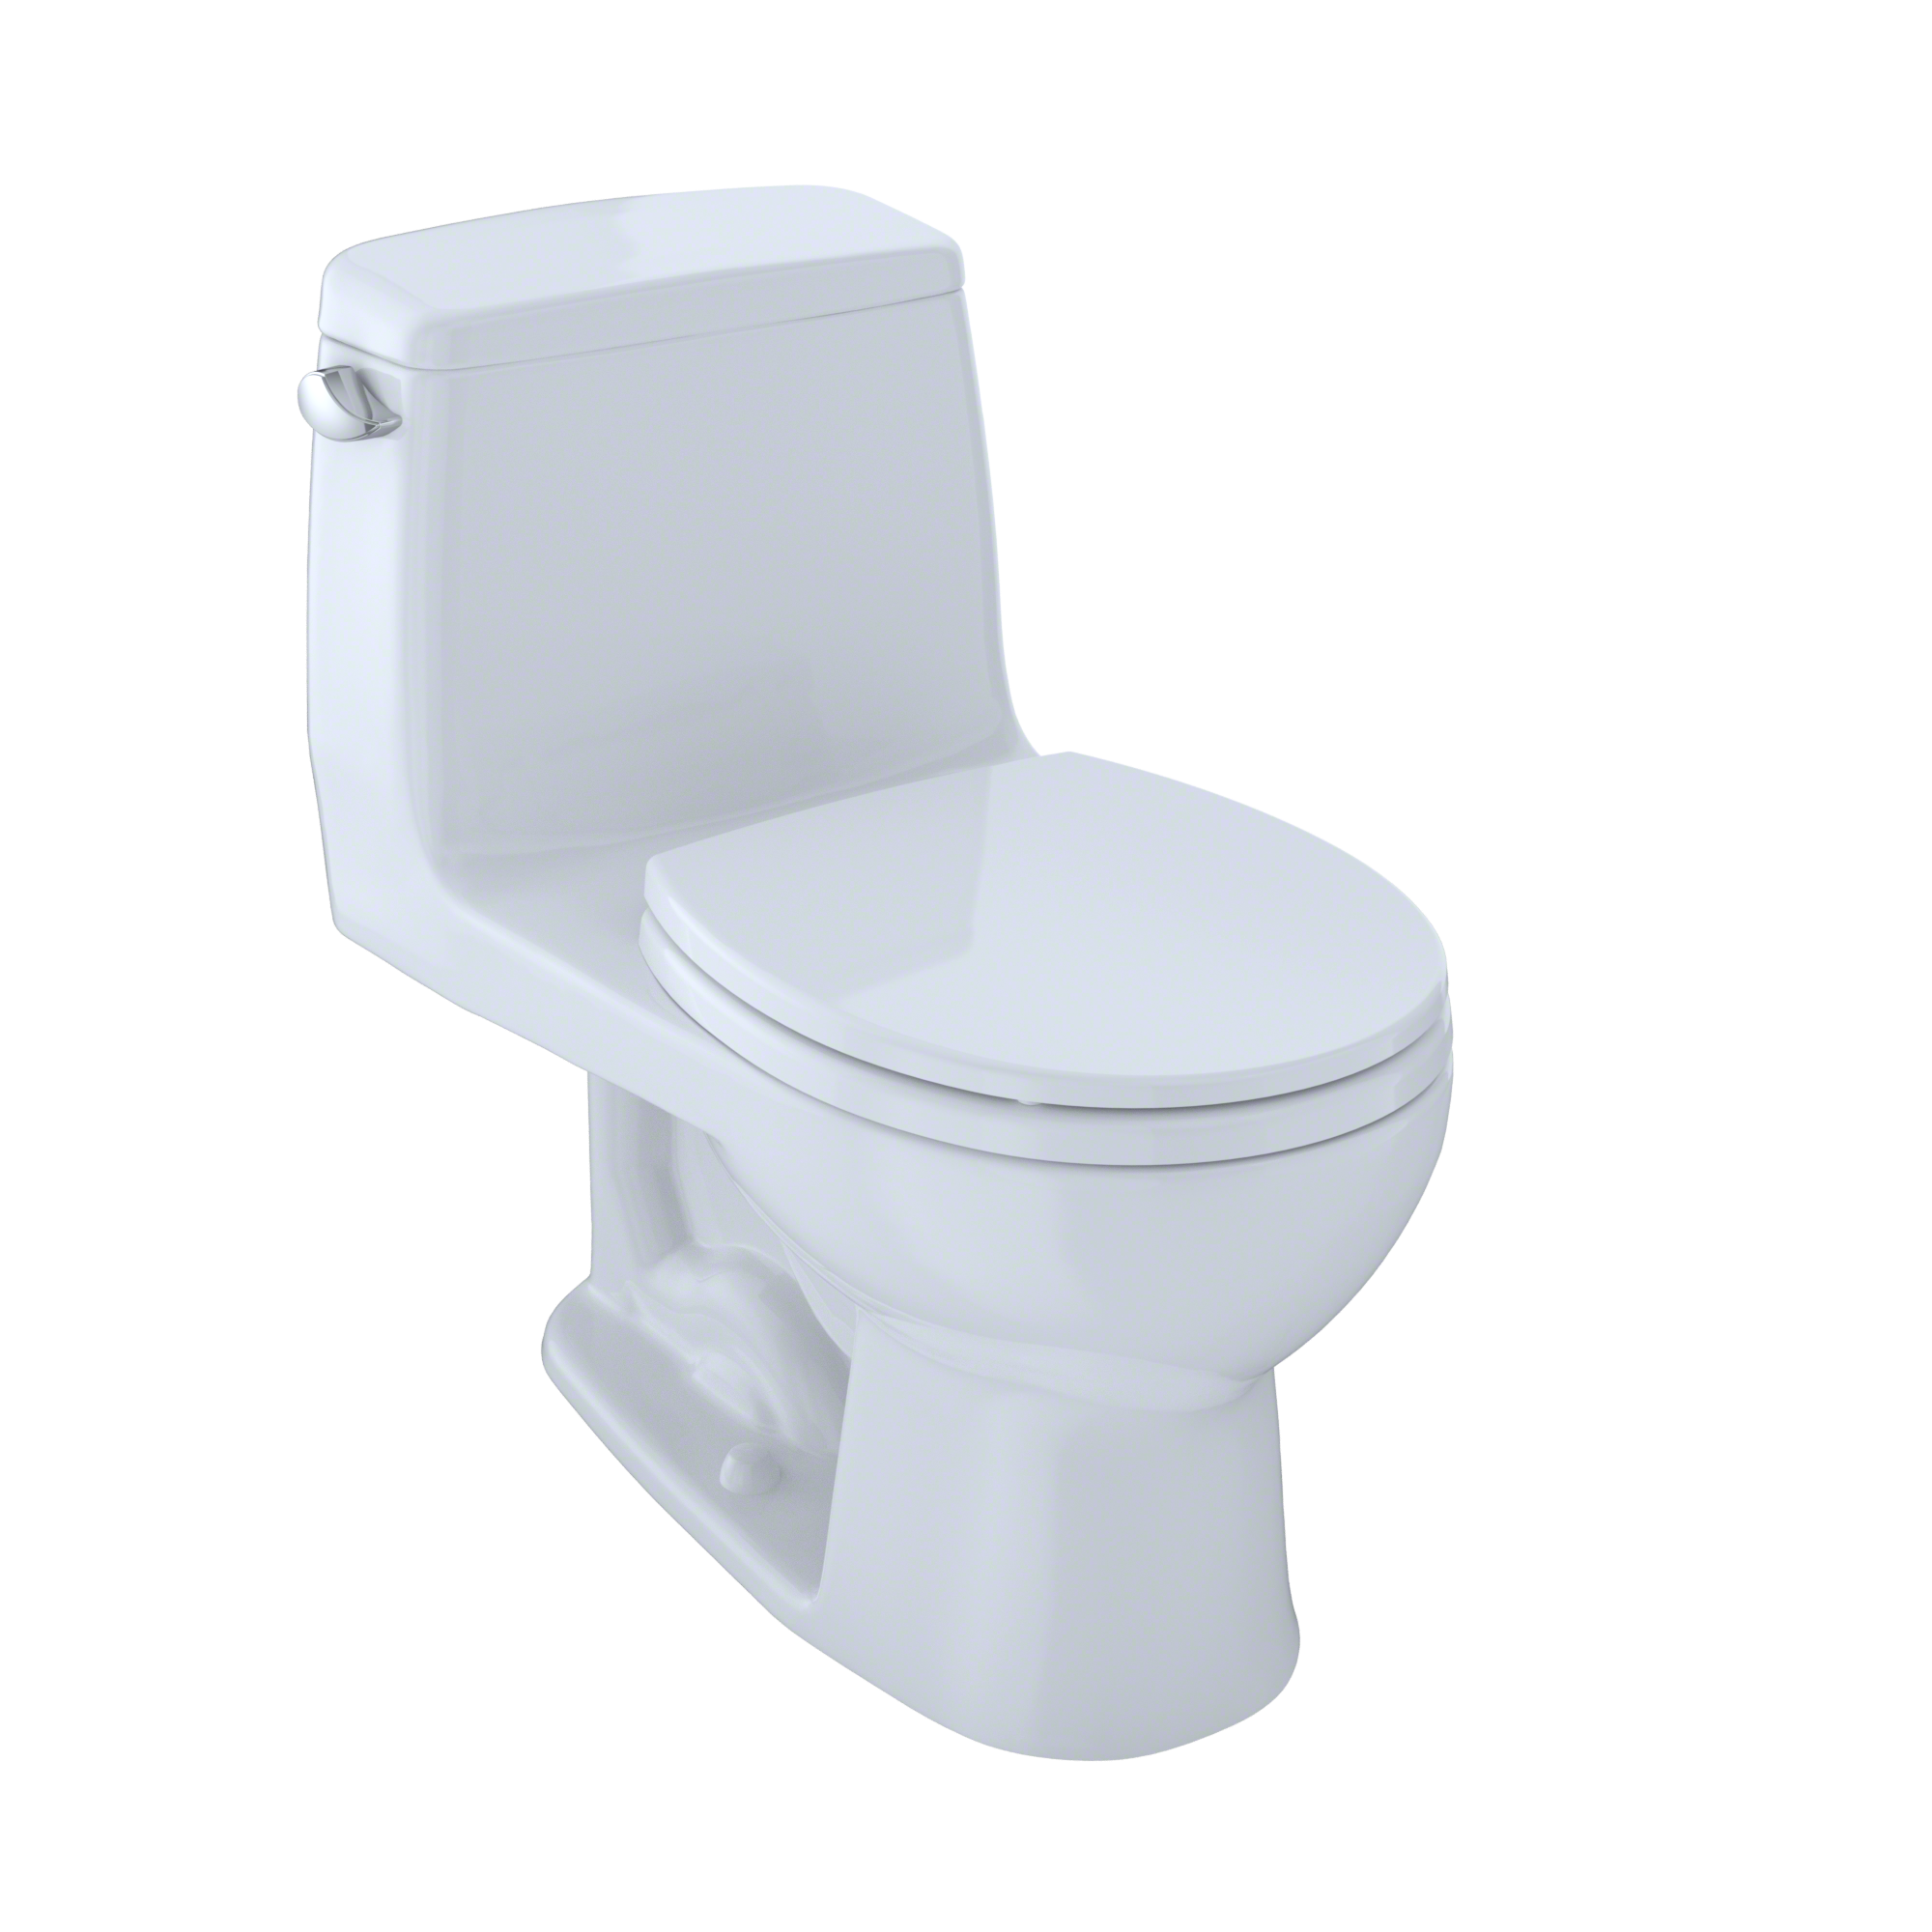 Toto Ms853113s Ultramax 1.6 Gpf One Piece Round Toilet - - Cotton - image 1 of 5